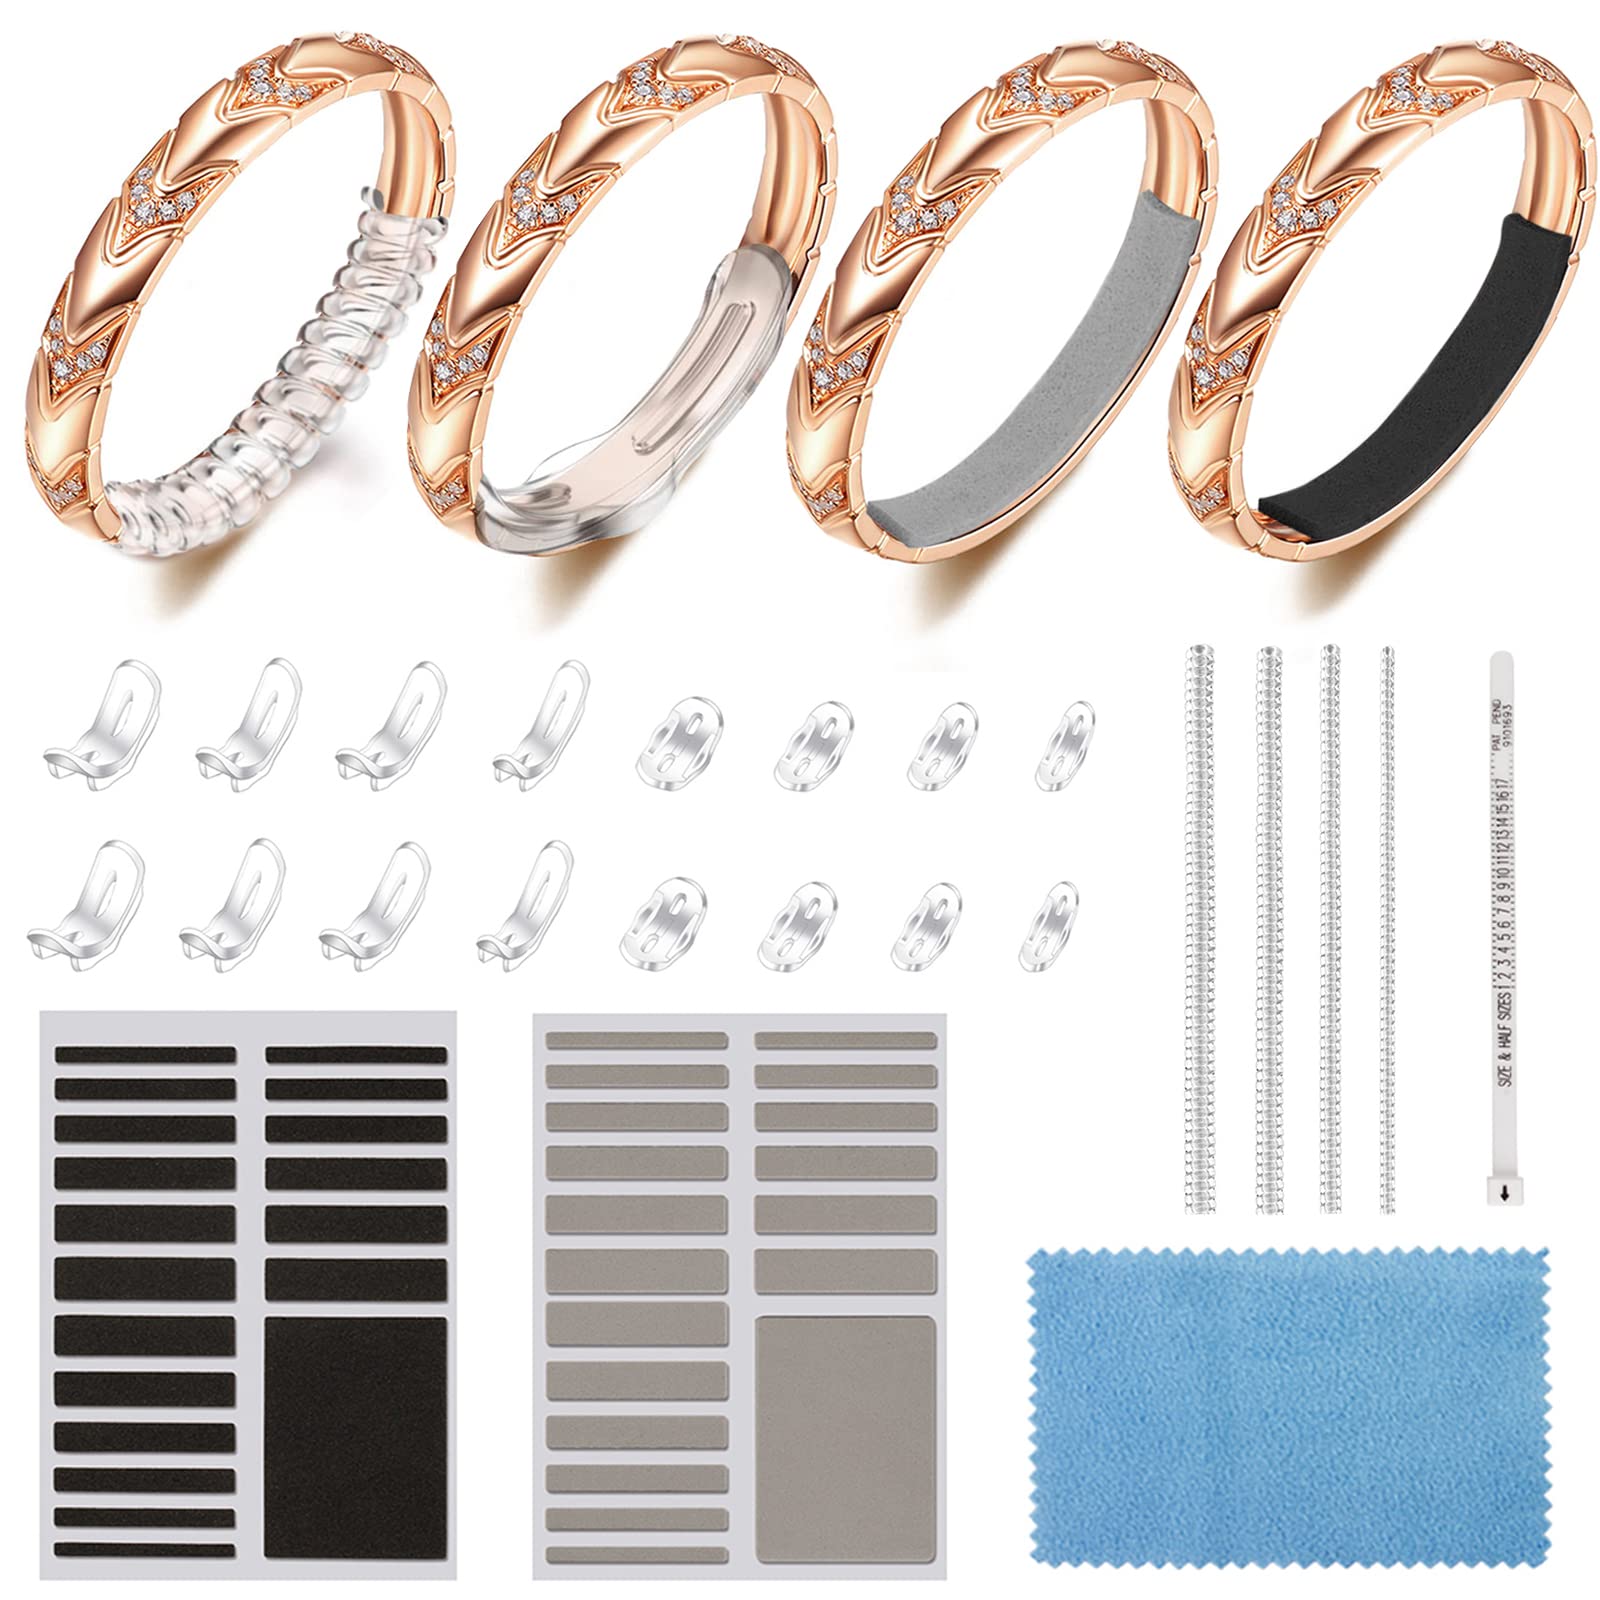 Ring Sizer set III – Ring Size Adjusters